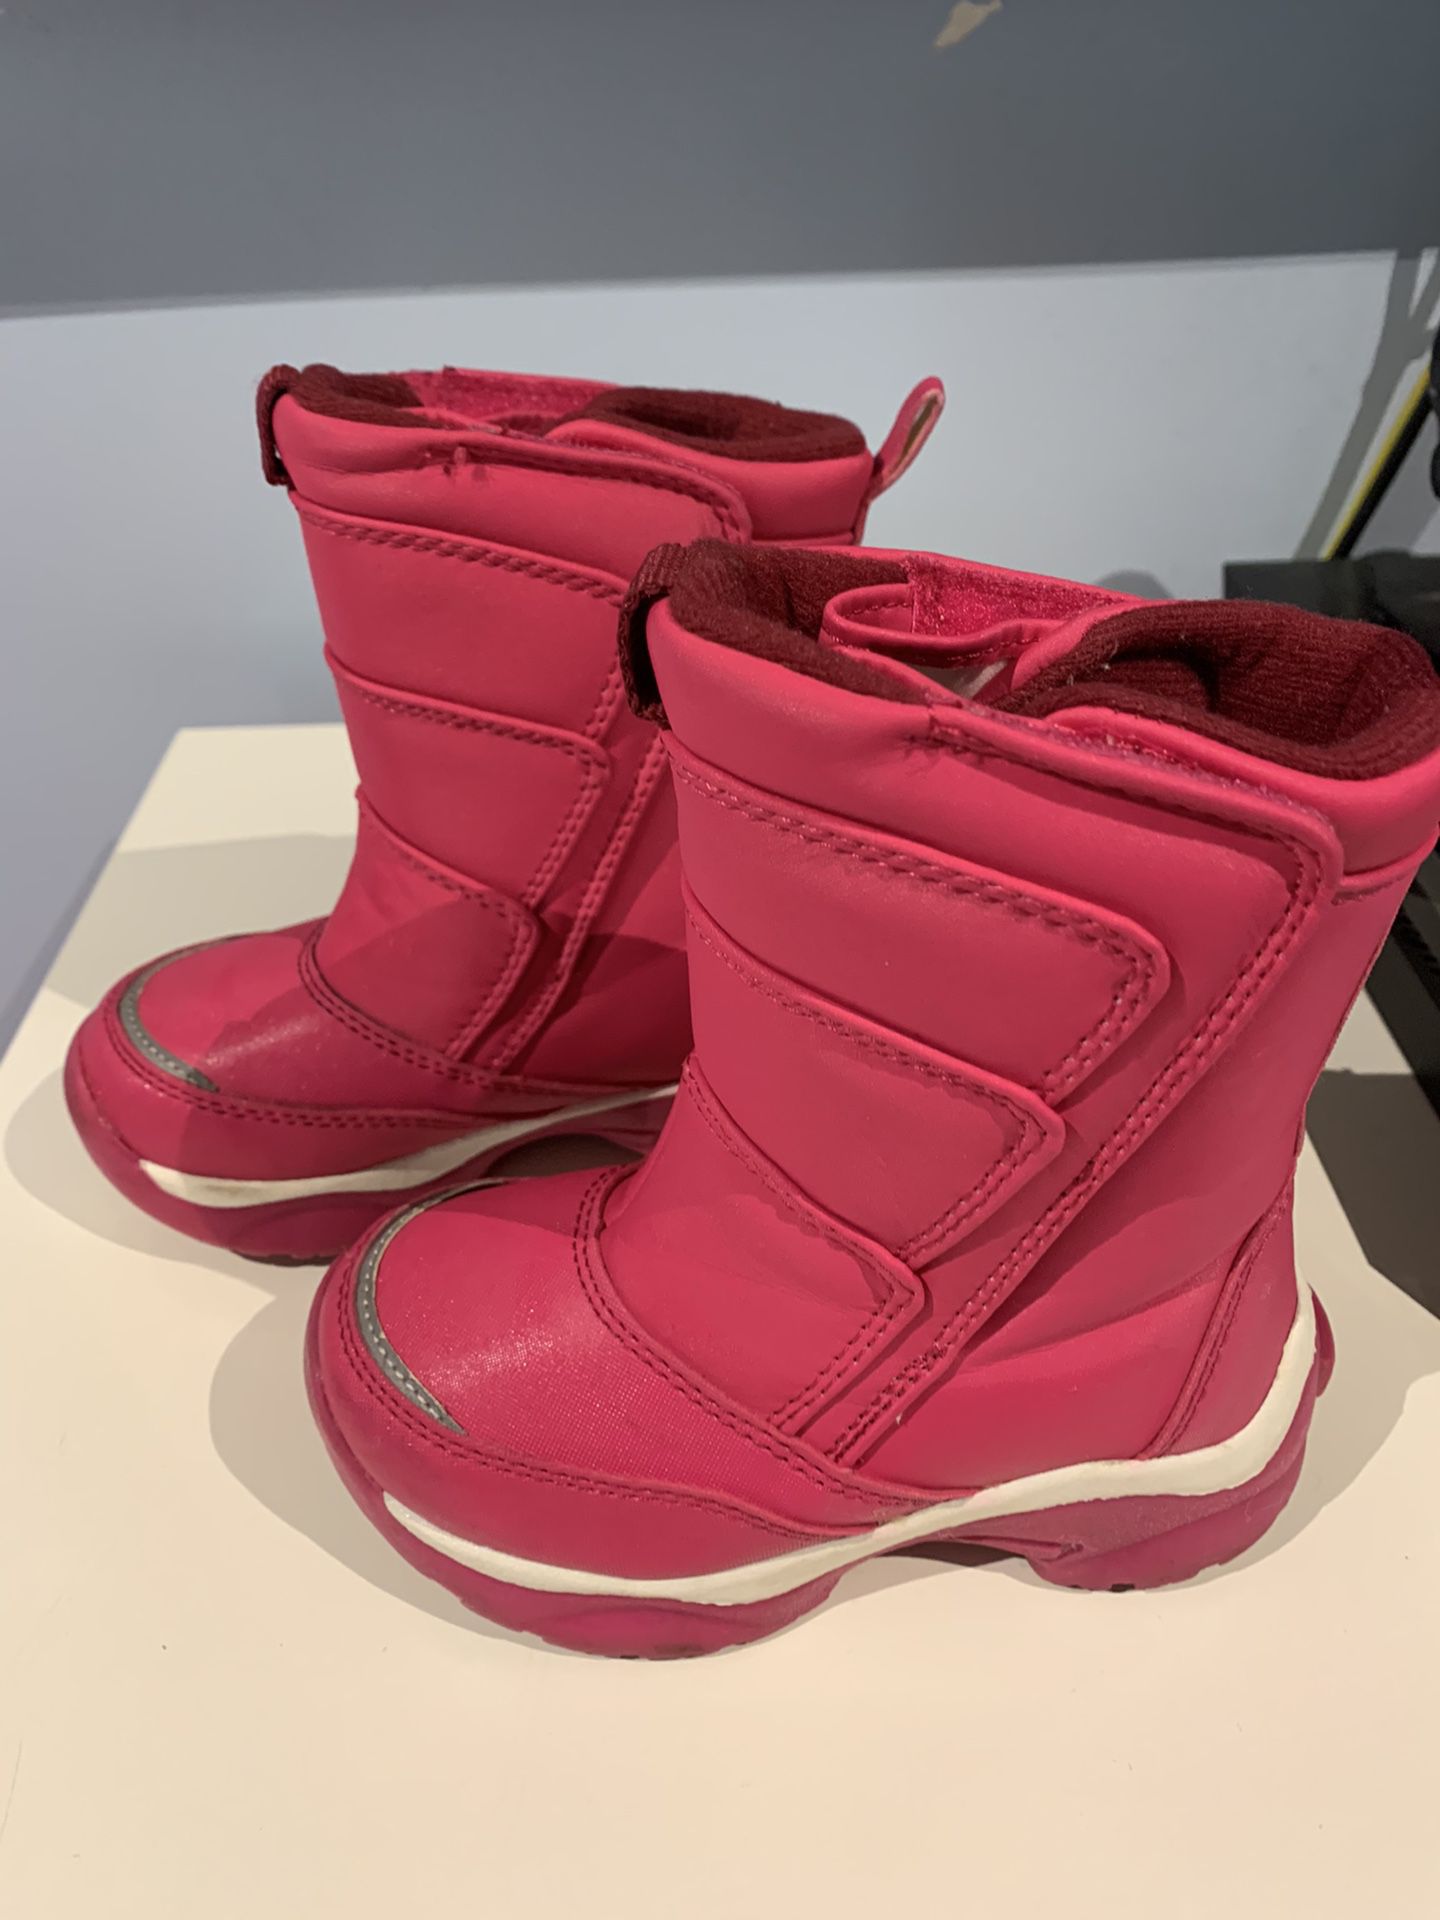 Snow boots for girl size 8 c